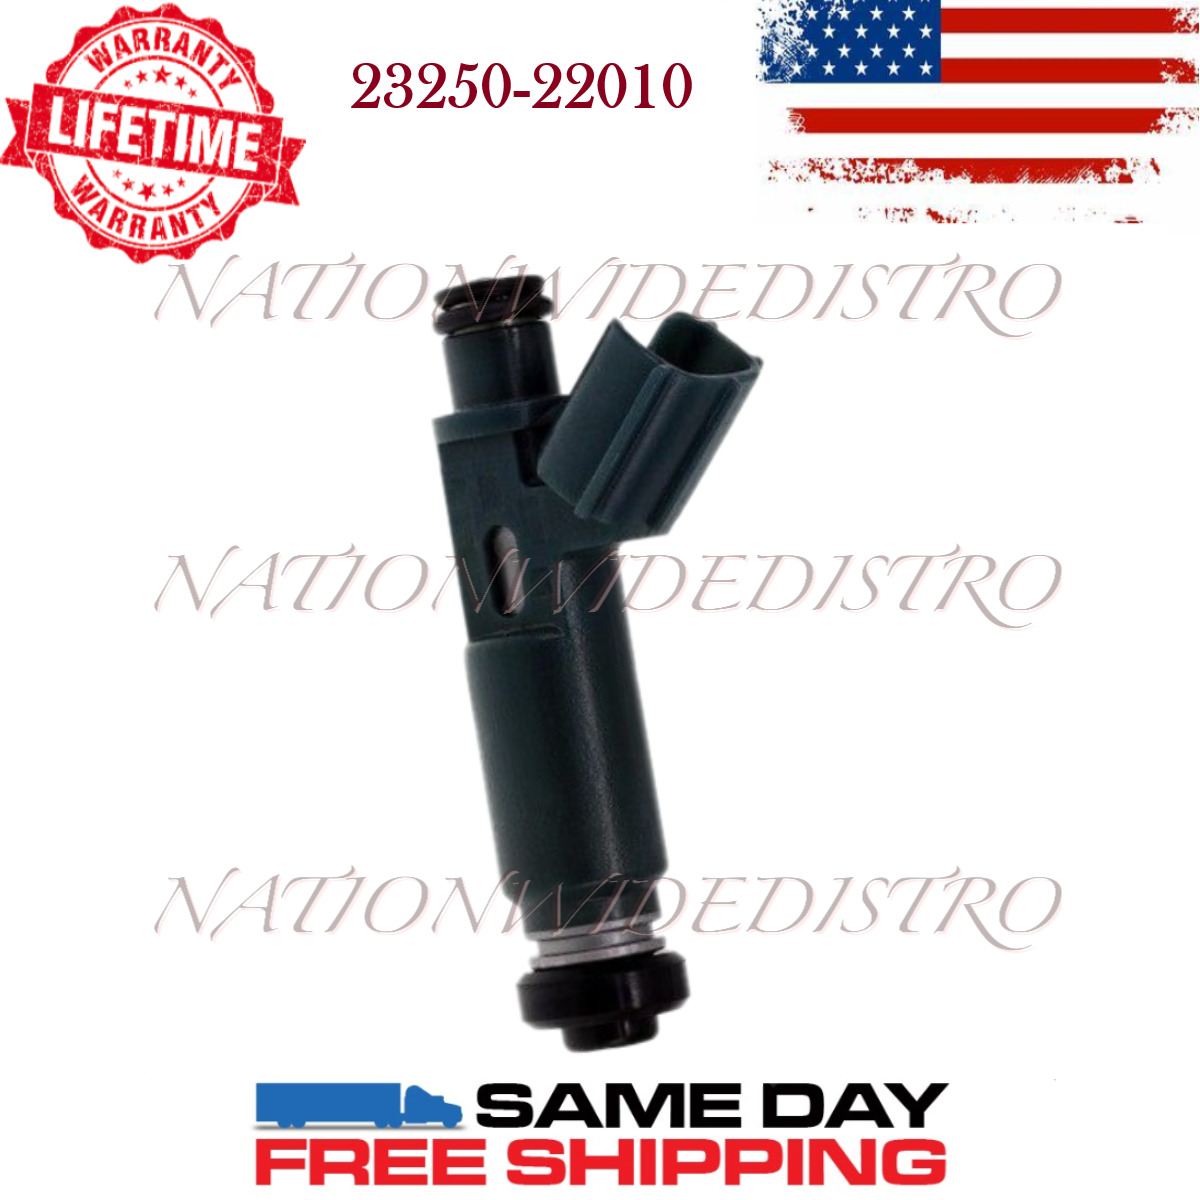 1x OEM Denso FUEL INJECTOR FOR 1998-1999 Chevy Prizm 1.8L I4 23250-22010